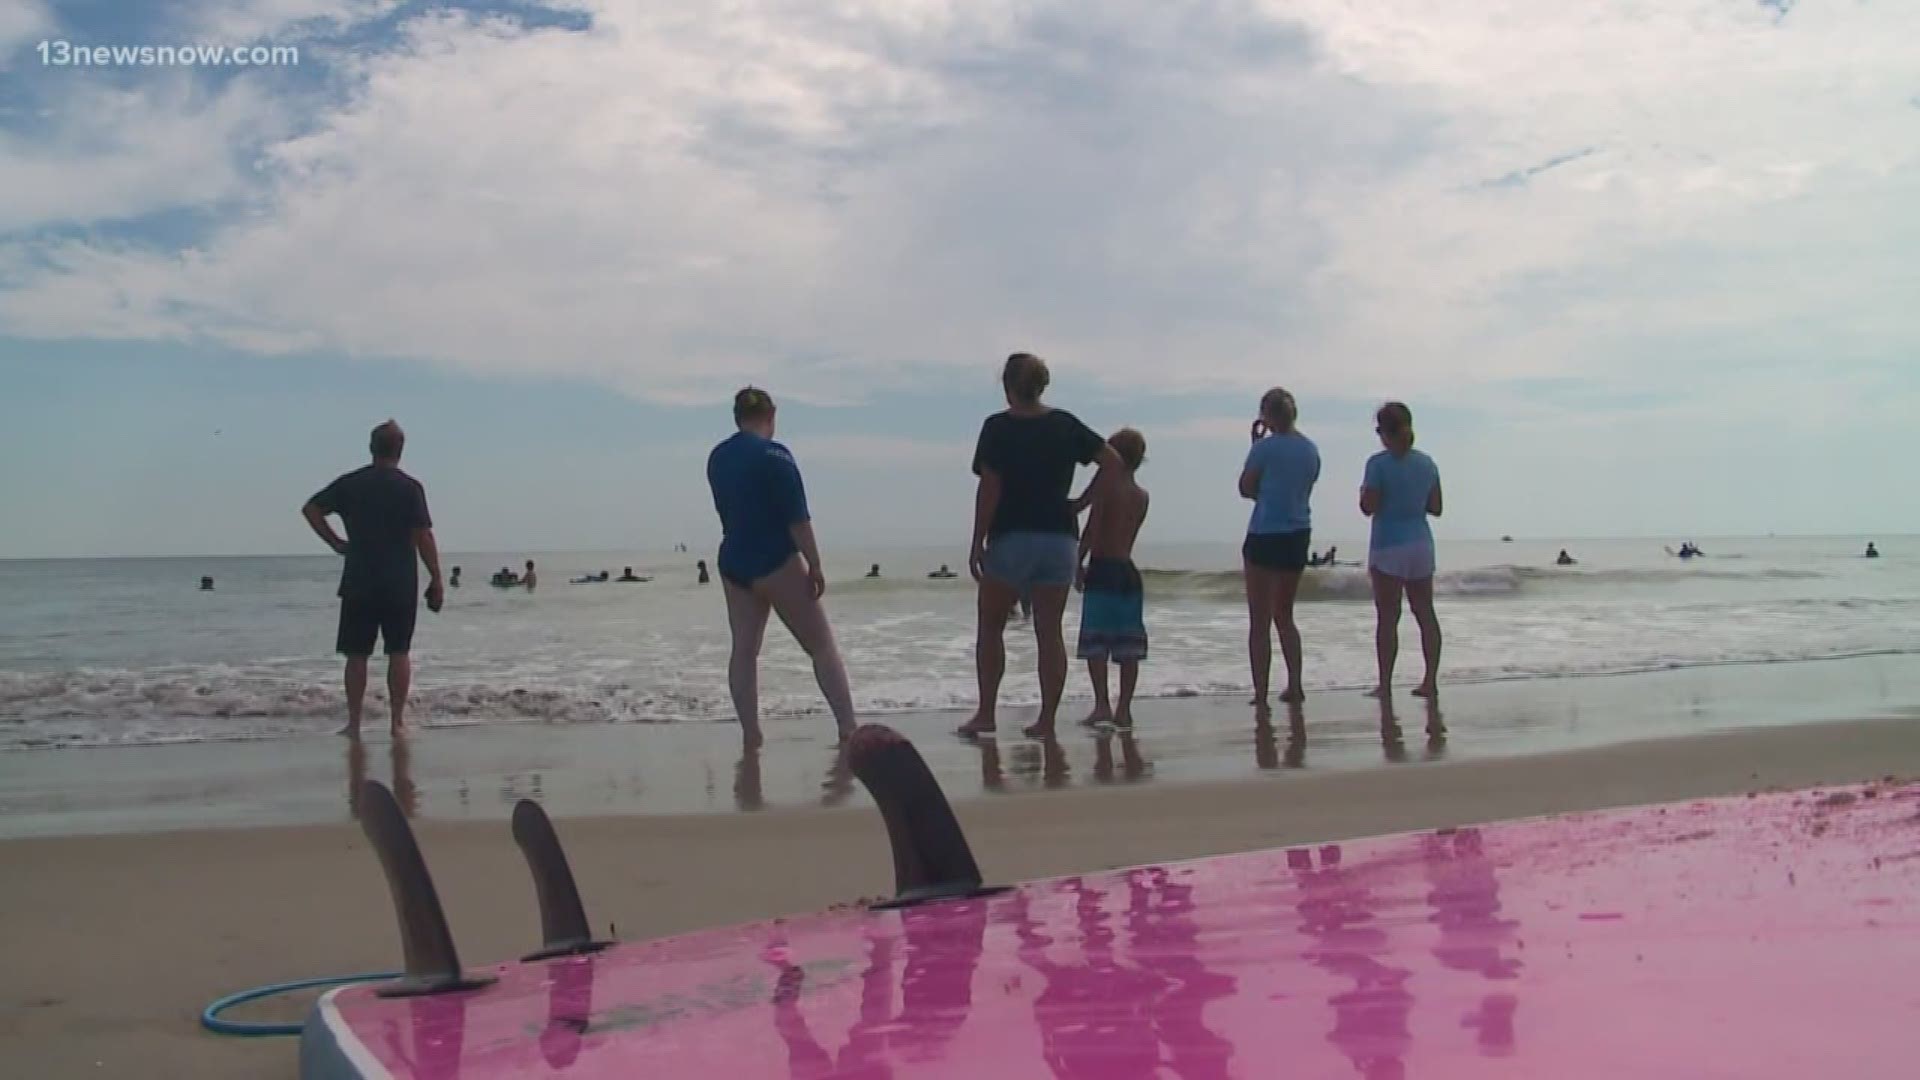 Students at Green Run High School and Frank W. Cox High School came together to learn and teach surfing. It's a way to bring students together from different parts of the city for a positive purpose.